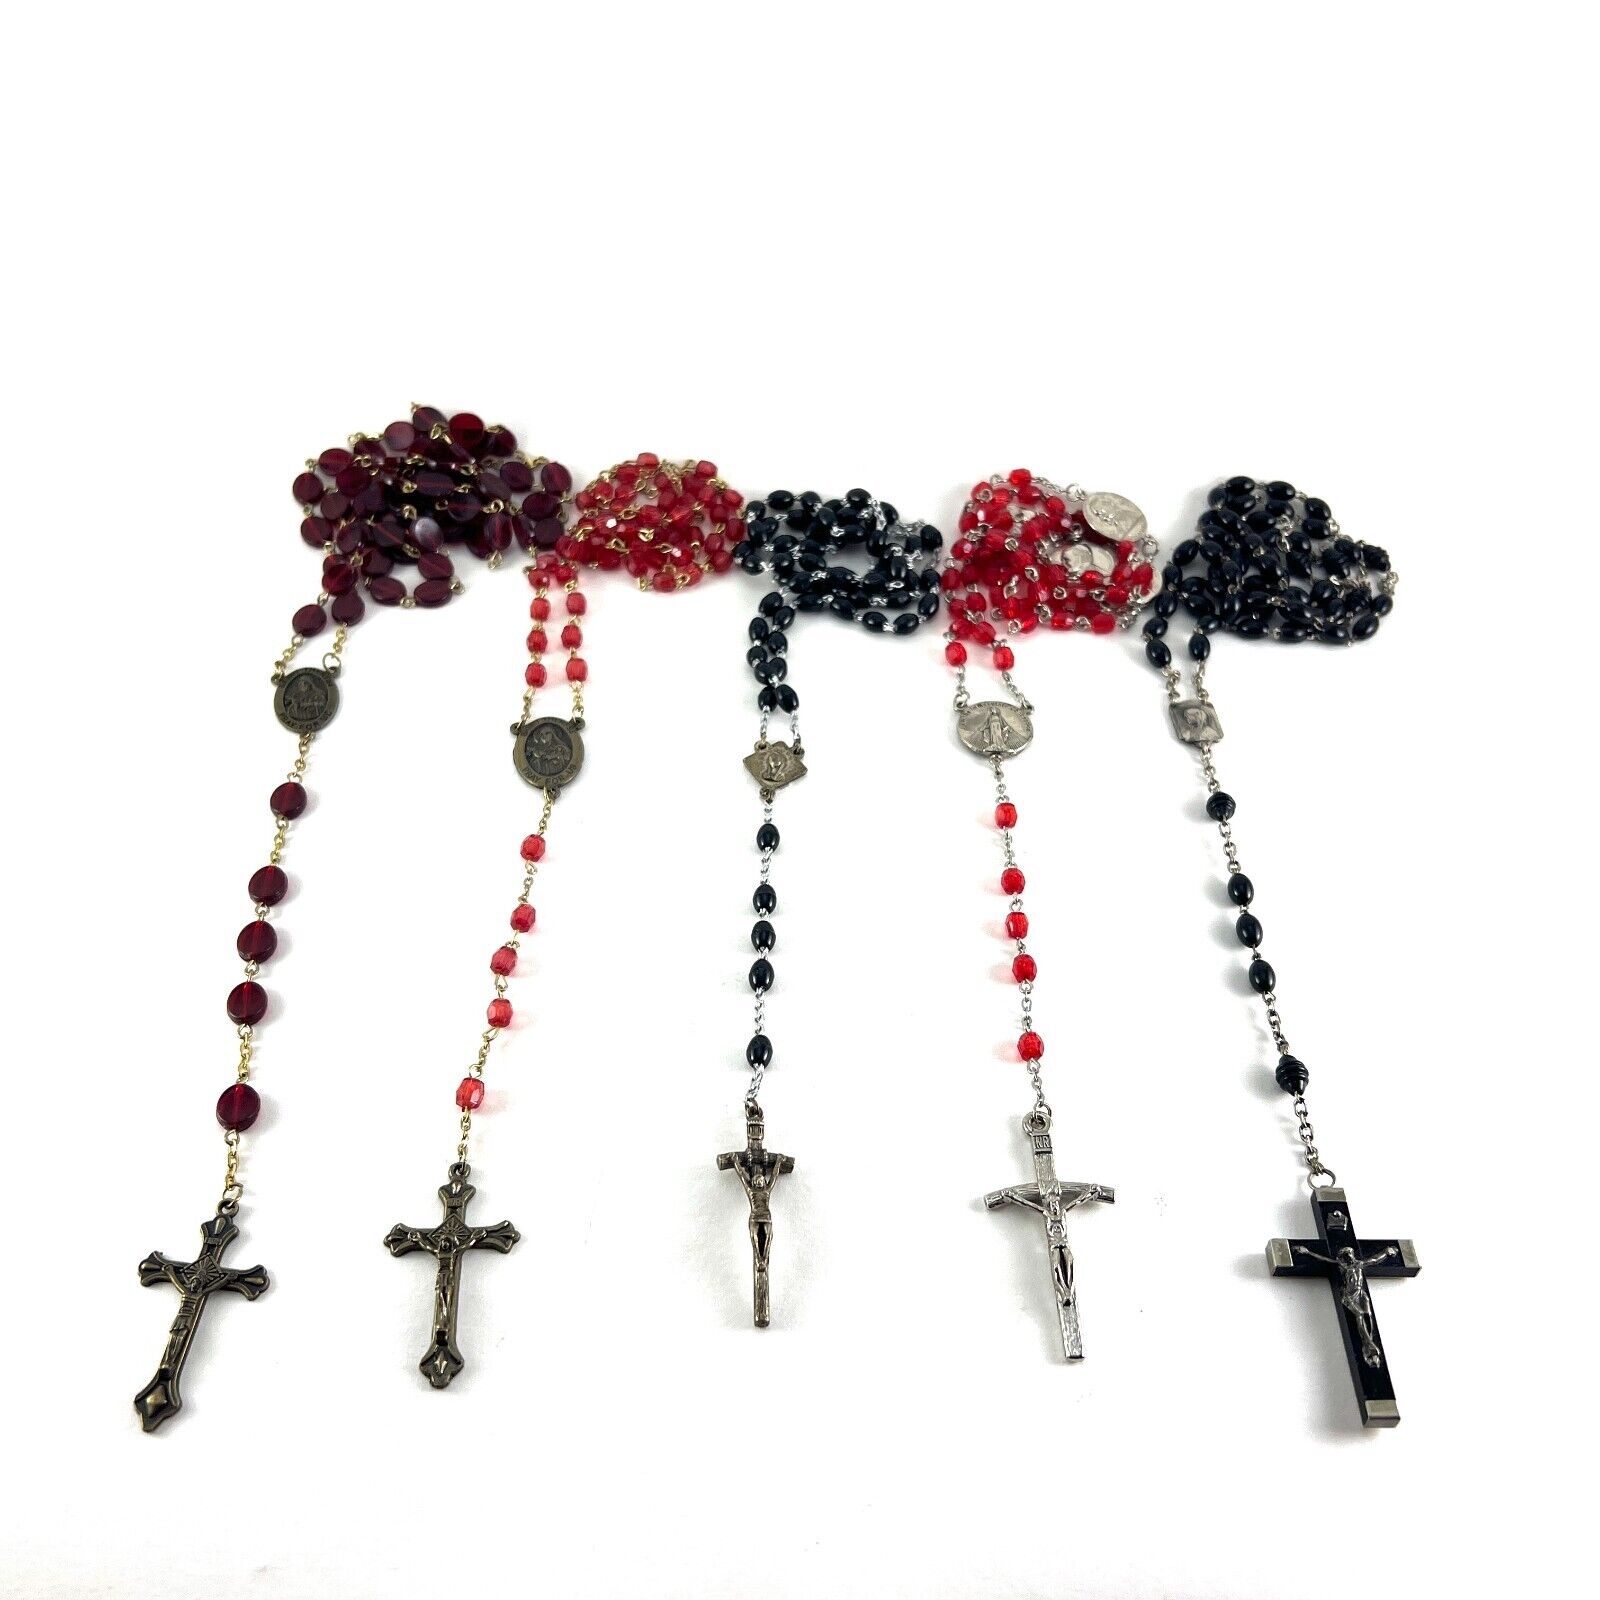 Vintange and Antique Catholic Rosary / Beads - Lot of 5